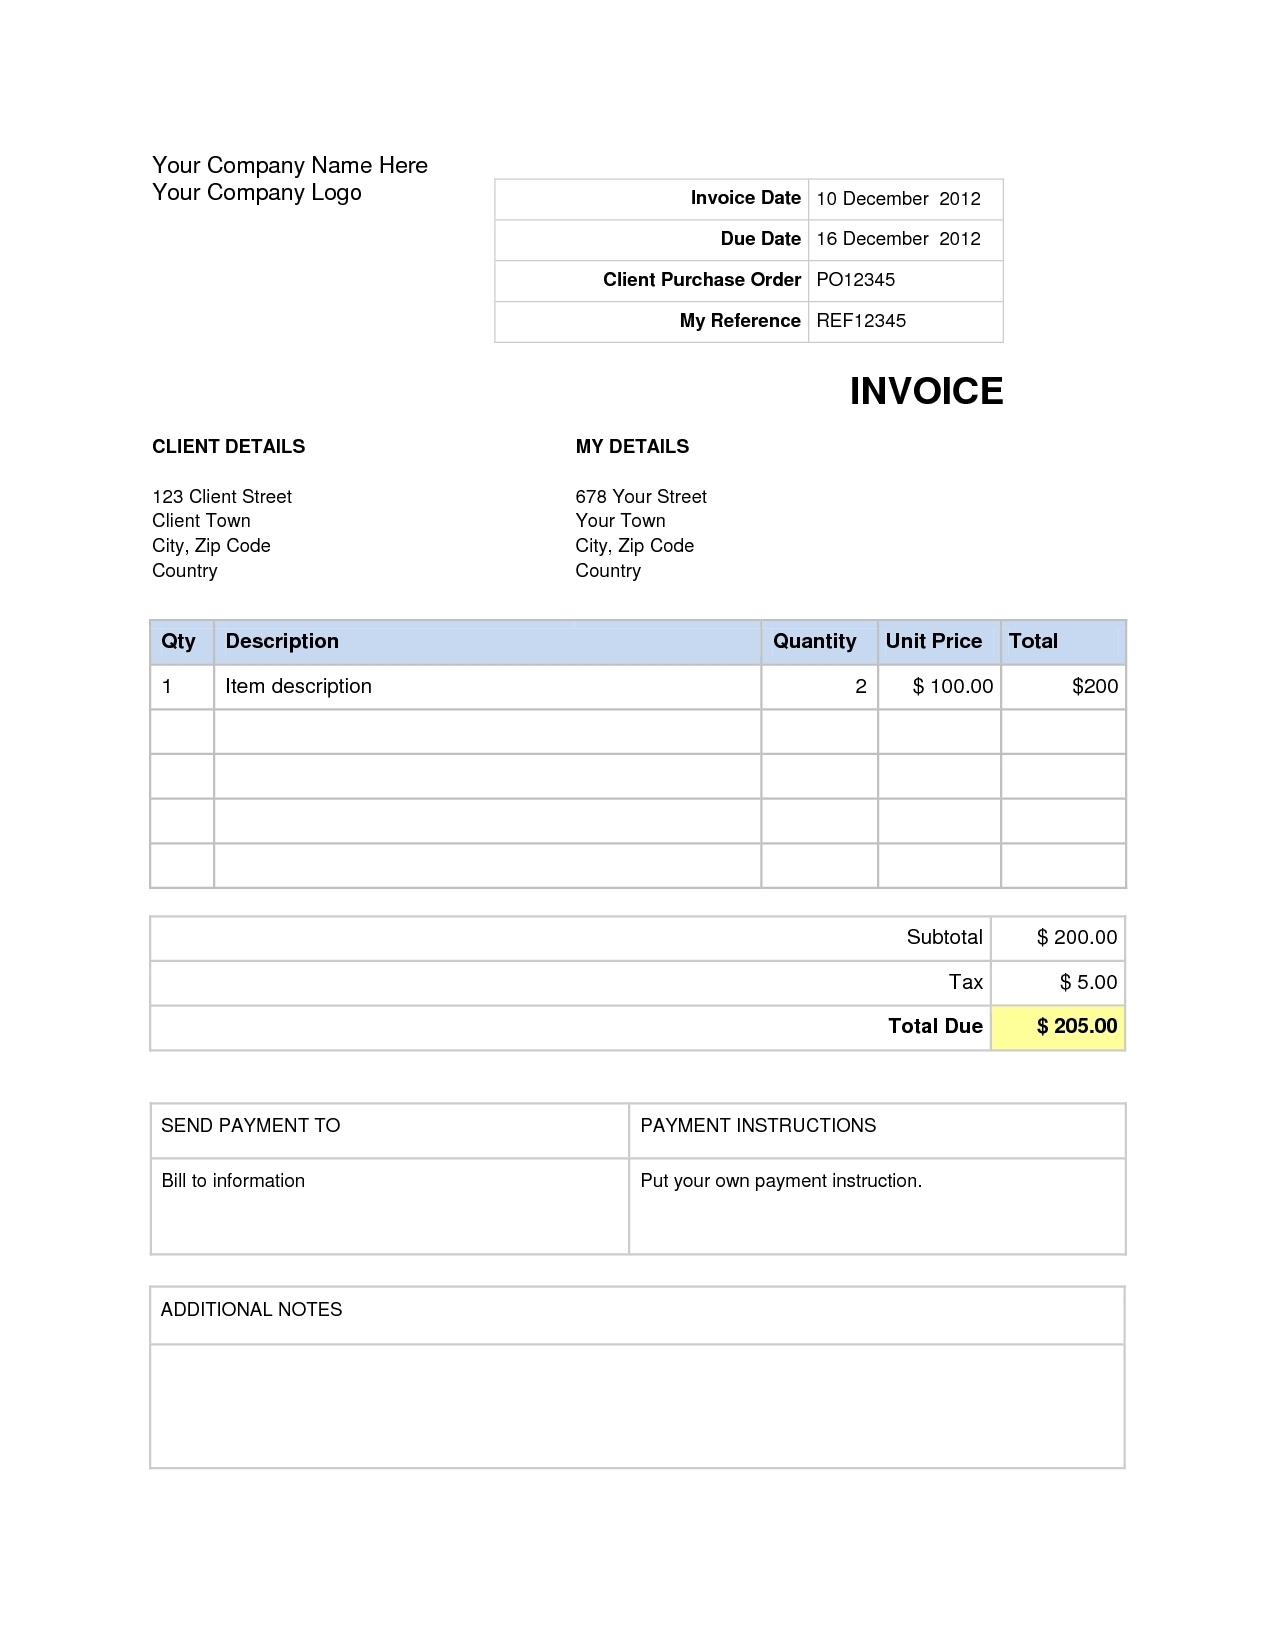 Download Invoice Template Word 2007 | Invoice Example Regarding Invoice Template Word 2010